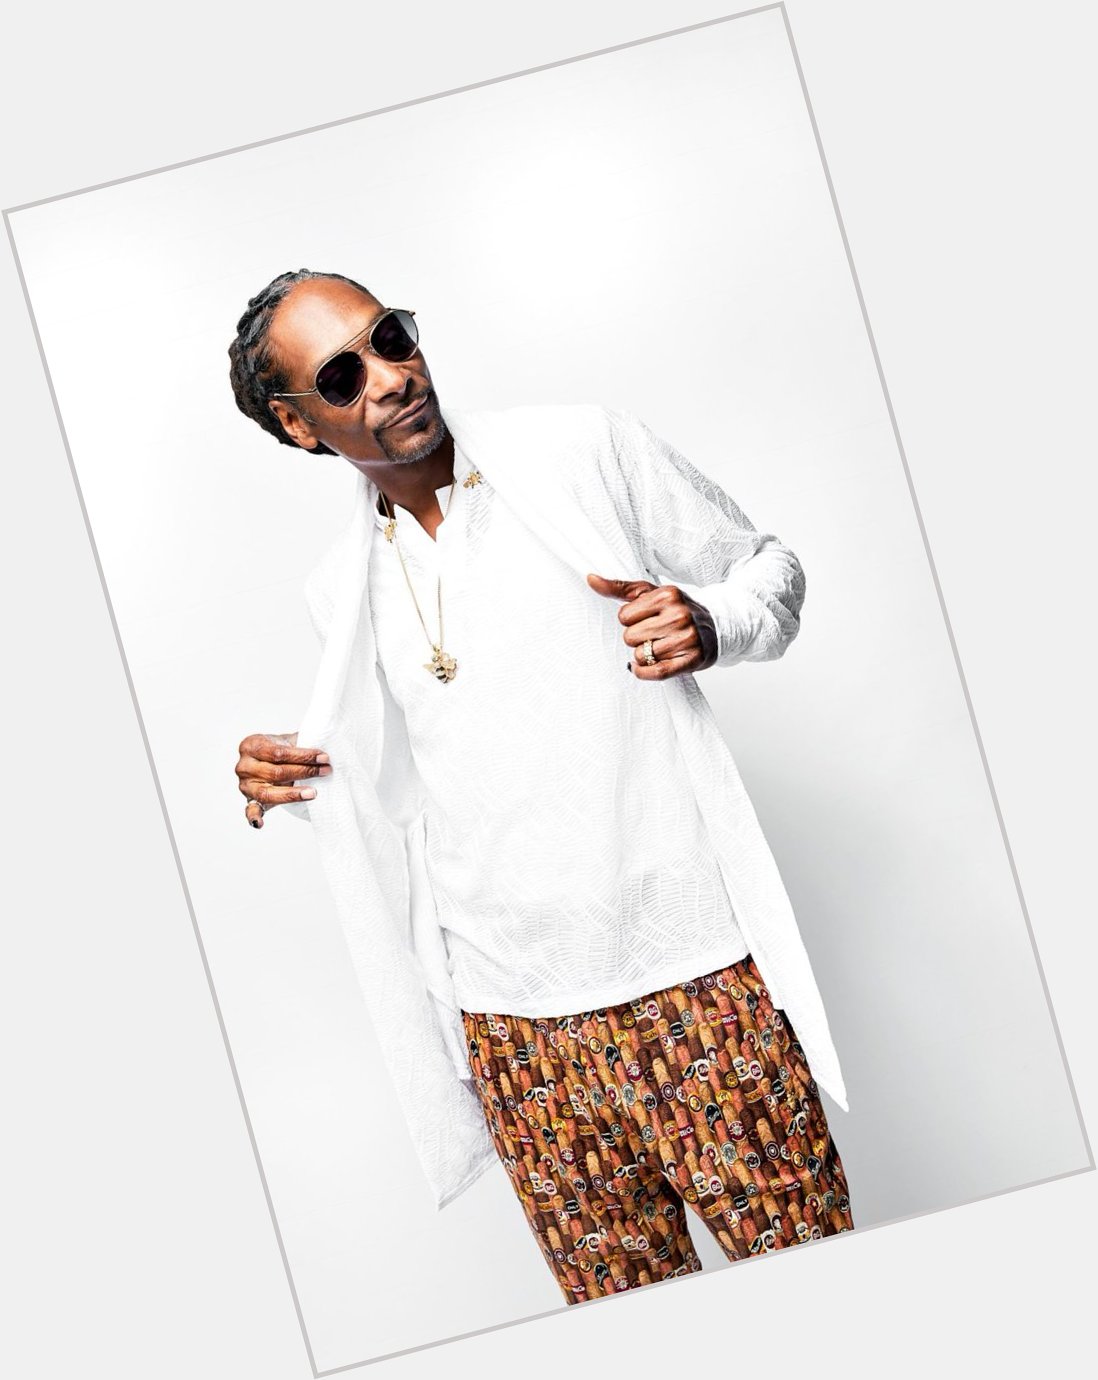 Happy 48th birthday to Calvin Broadus aka Snoop Dogg 
whats your favorite song from him? 